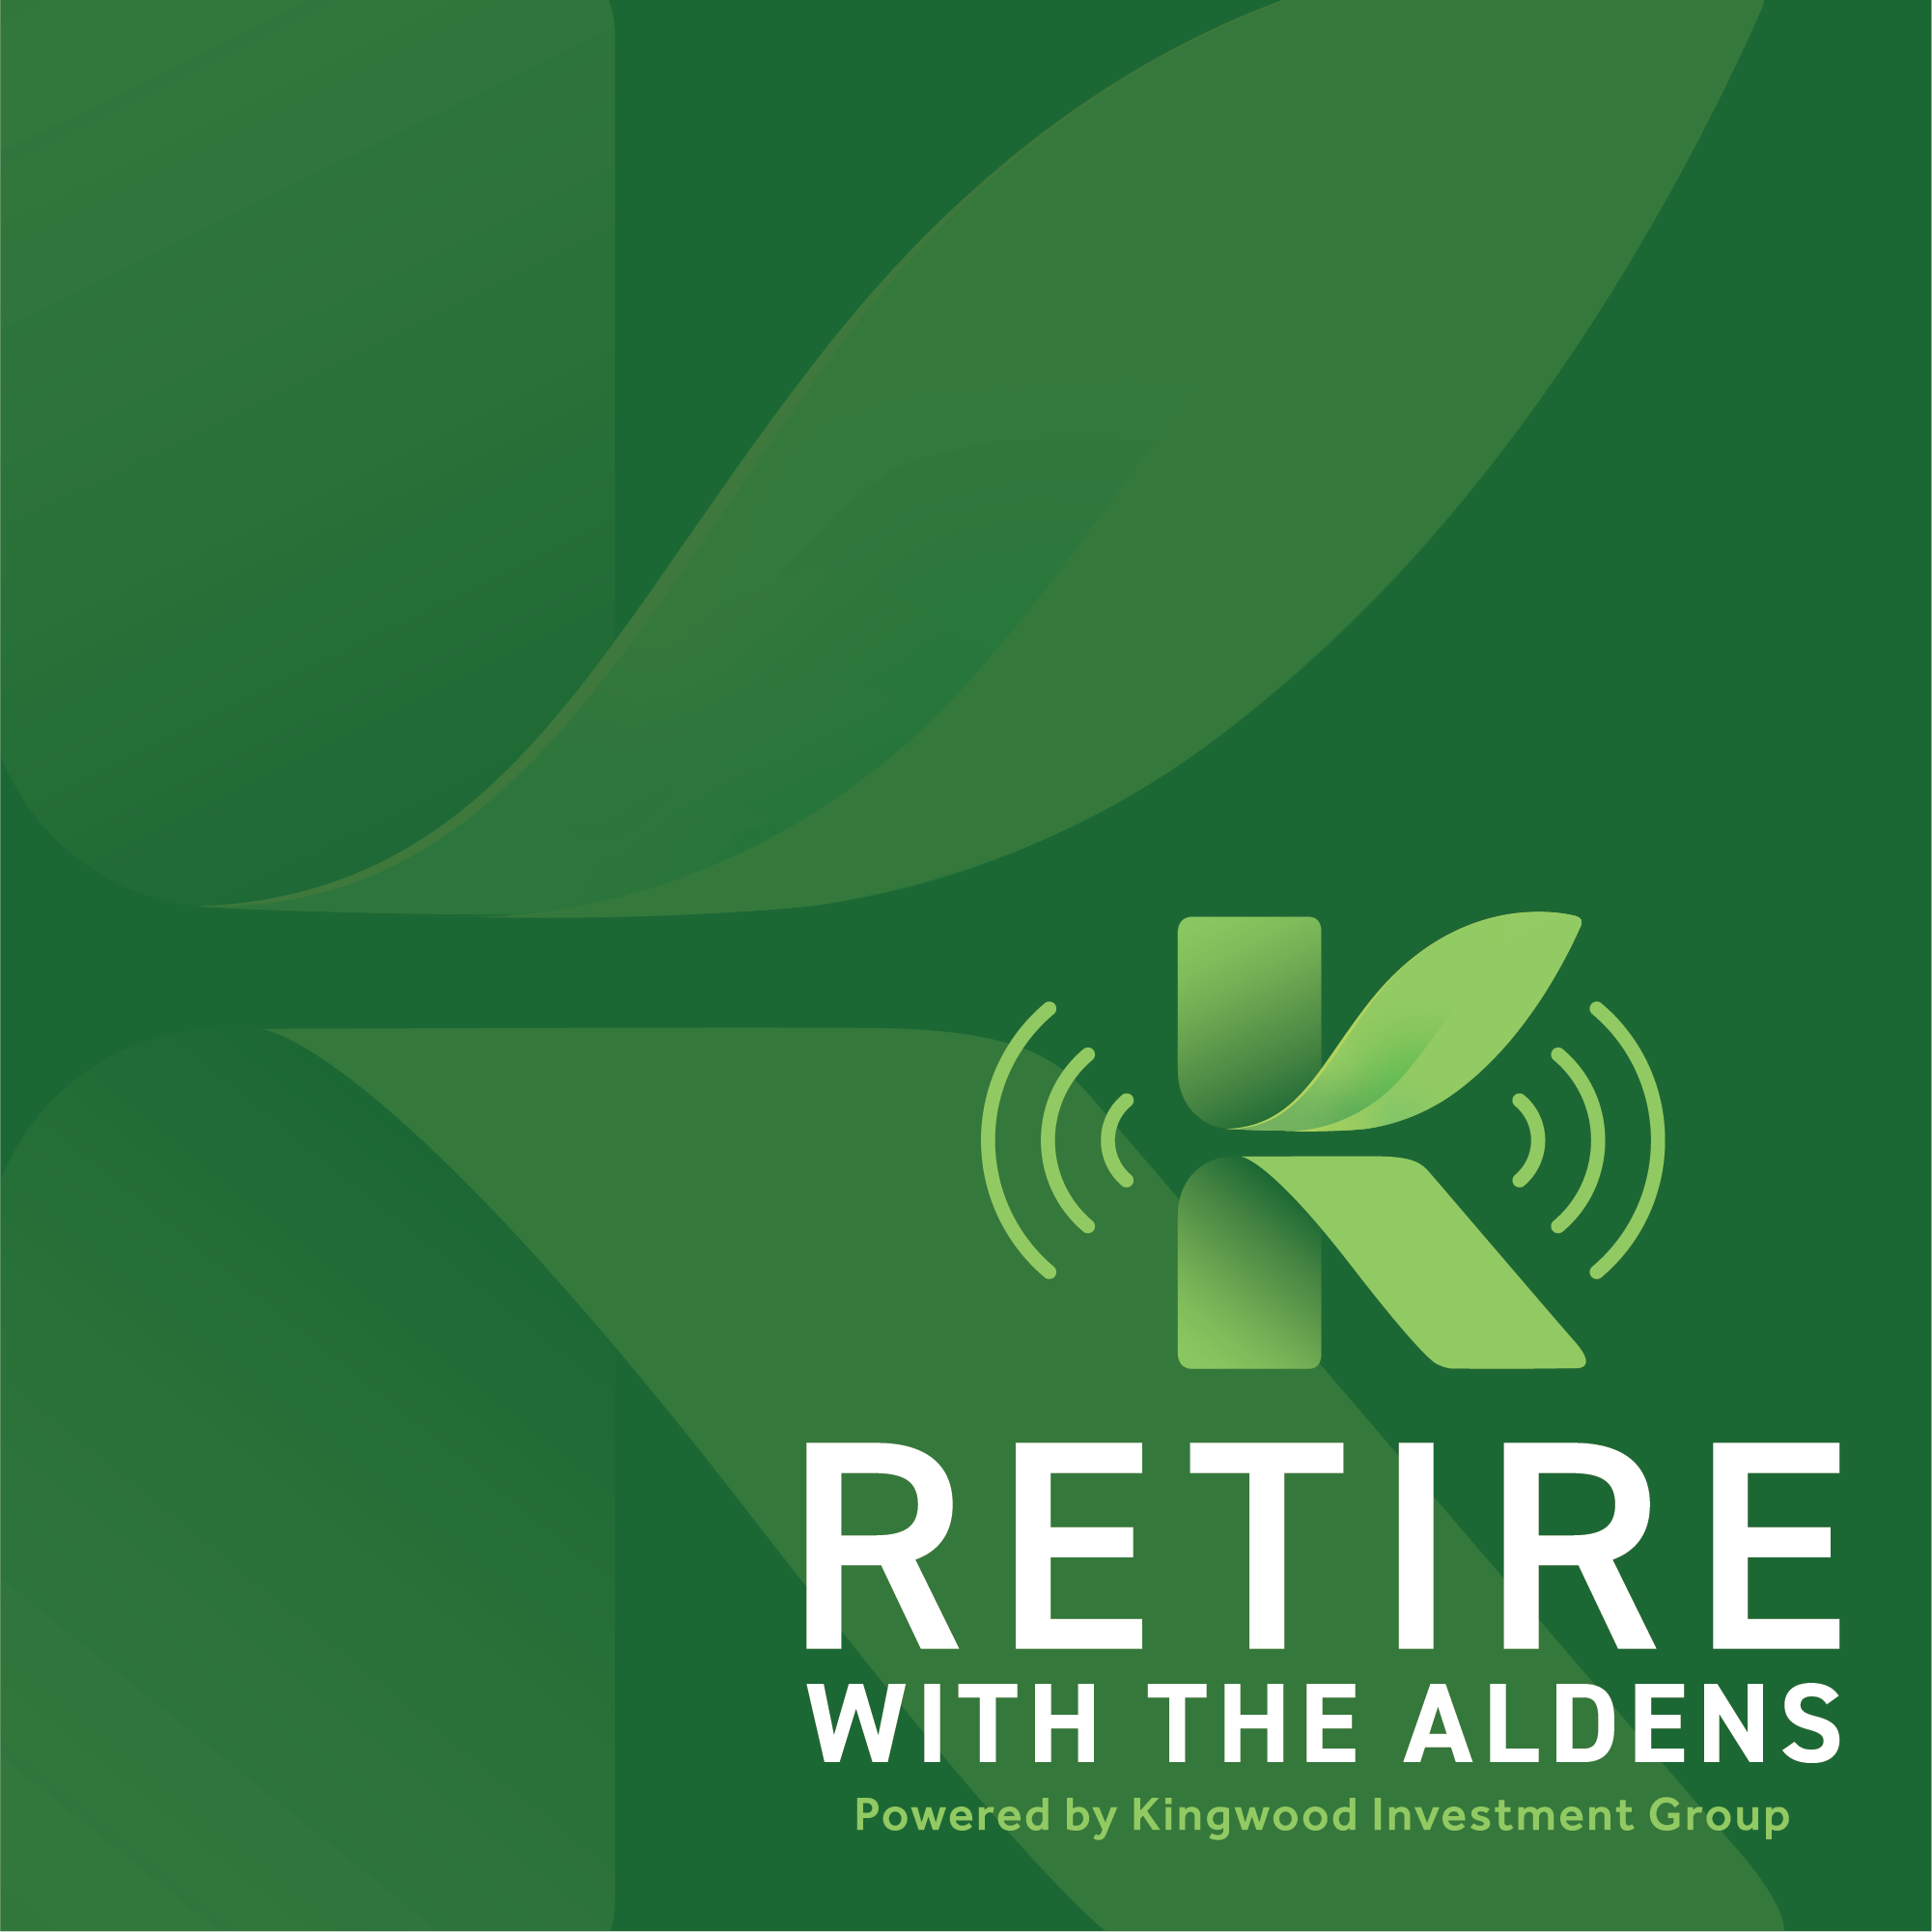 Planning for healthcare in retirement